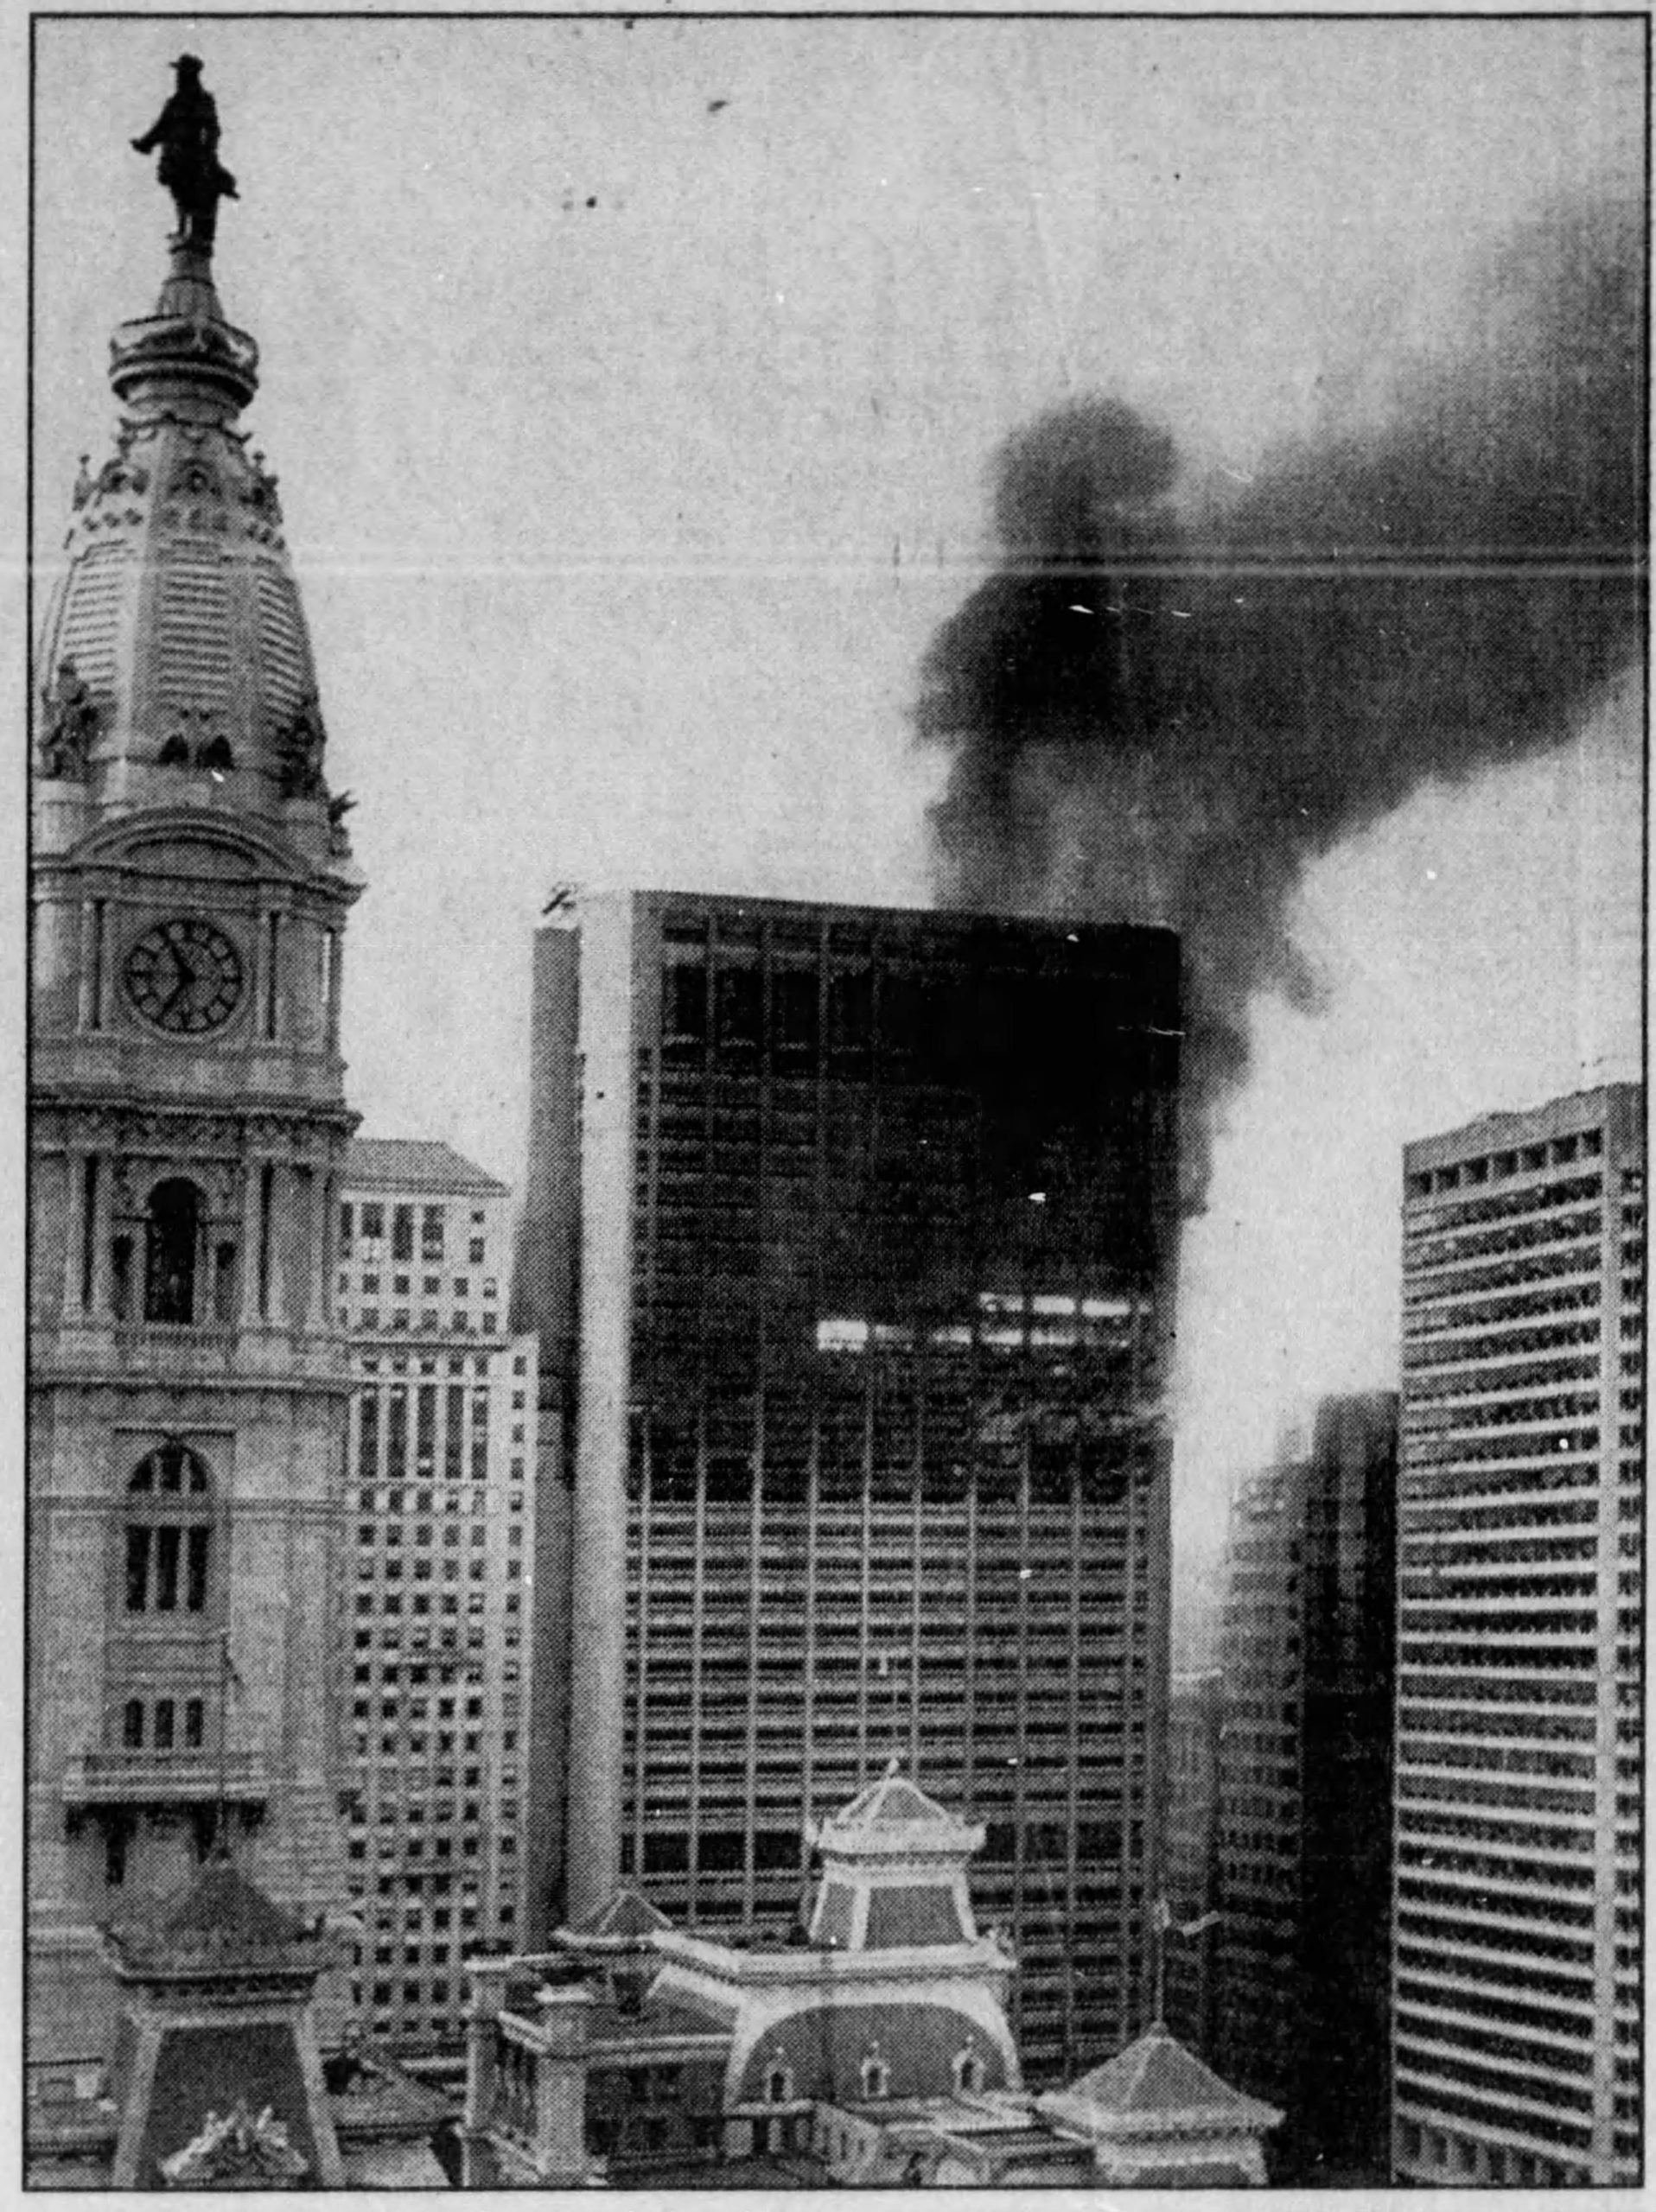 One Meridian Plaza on fire. Image from The Arizona Republic